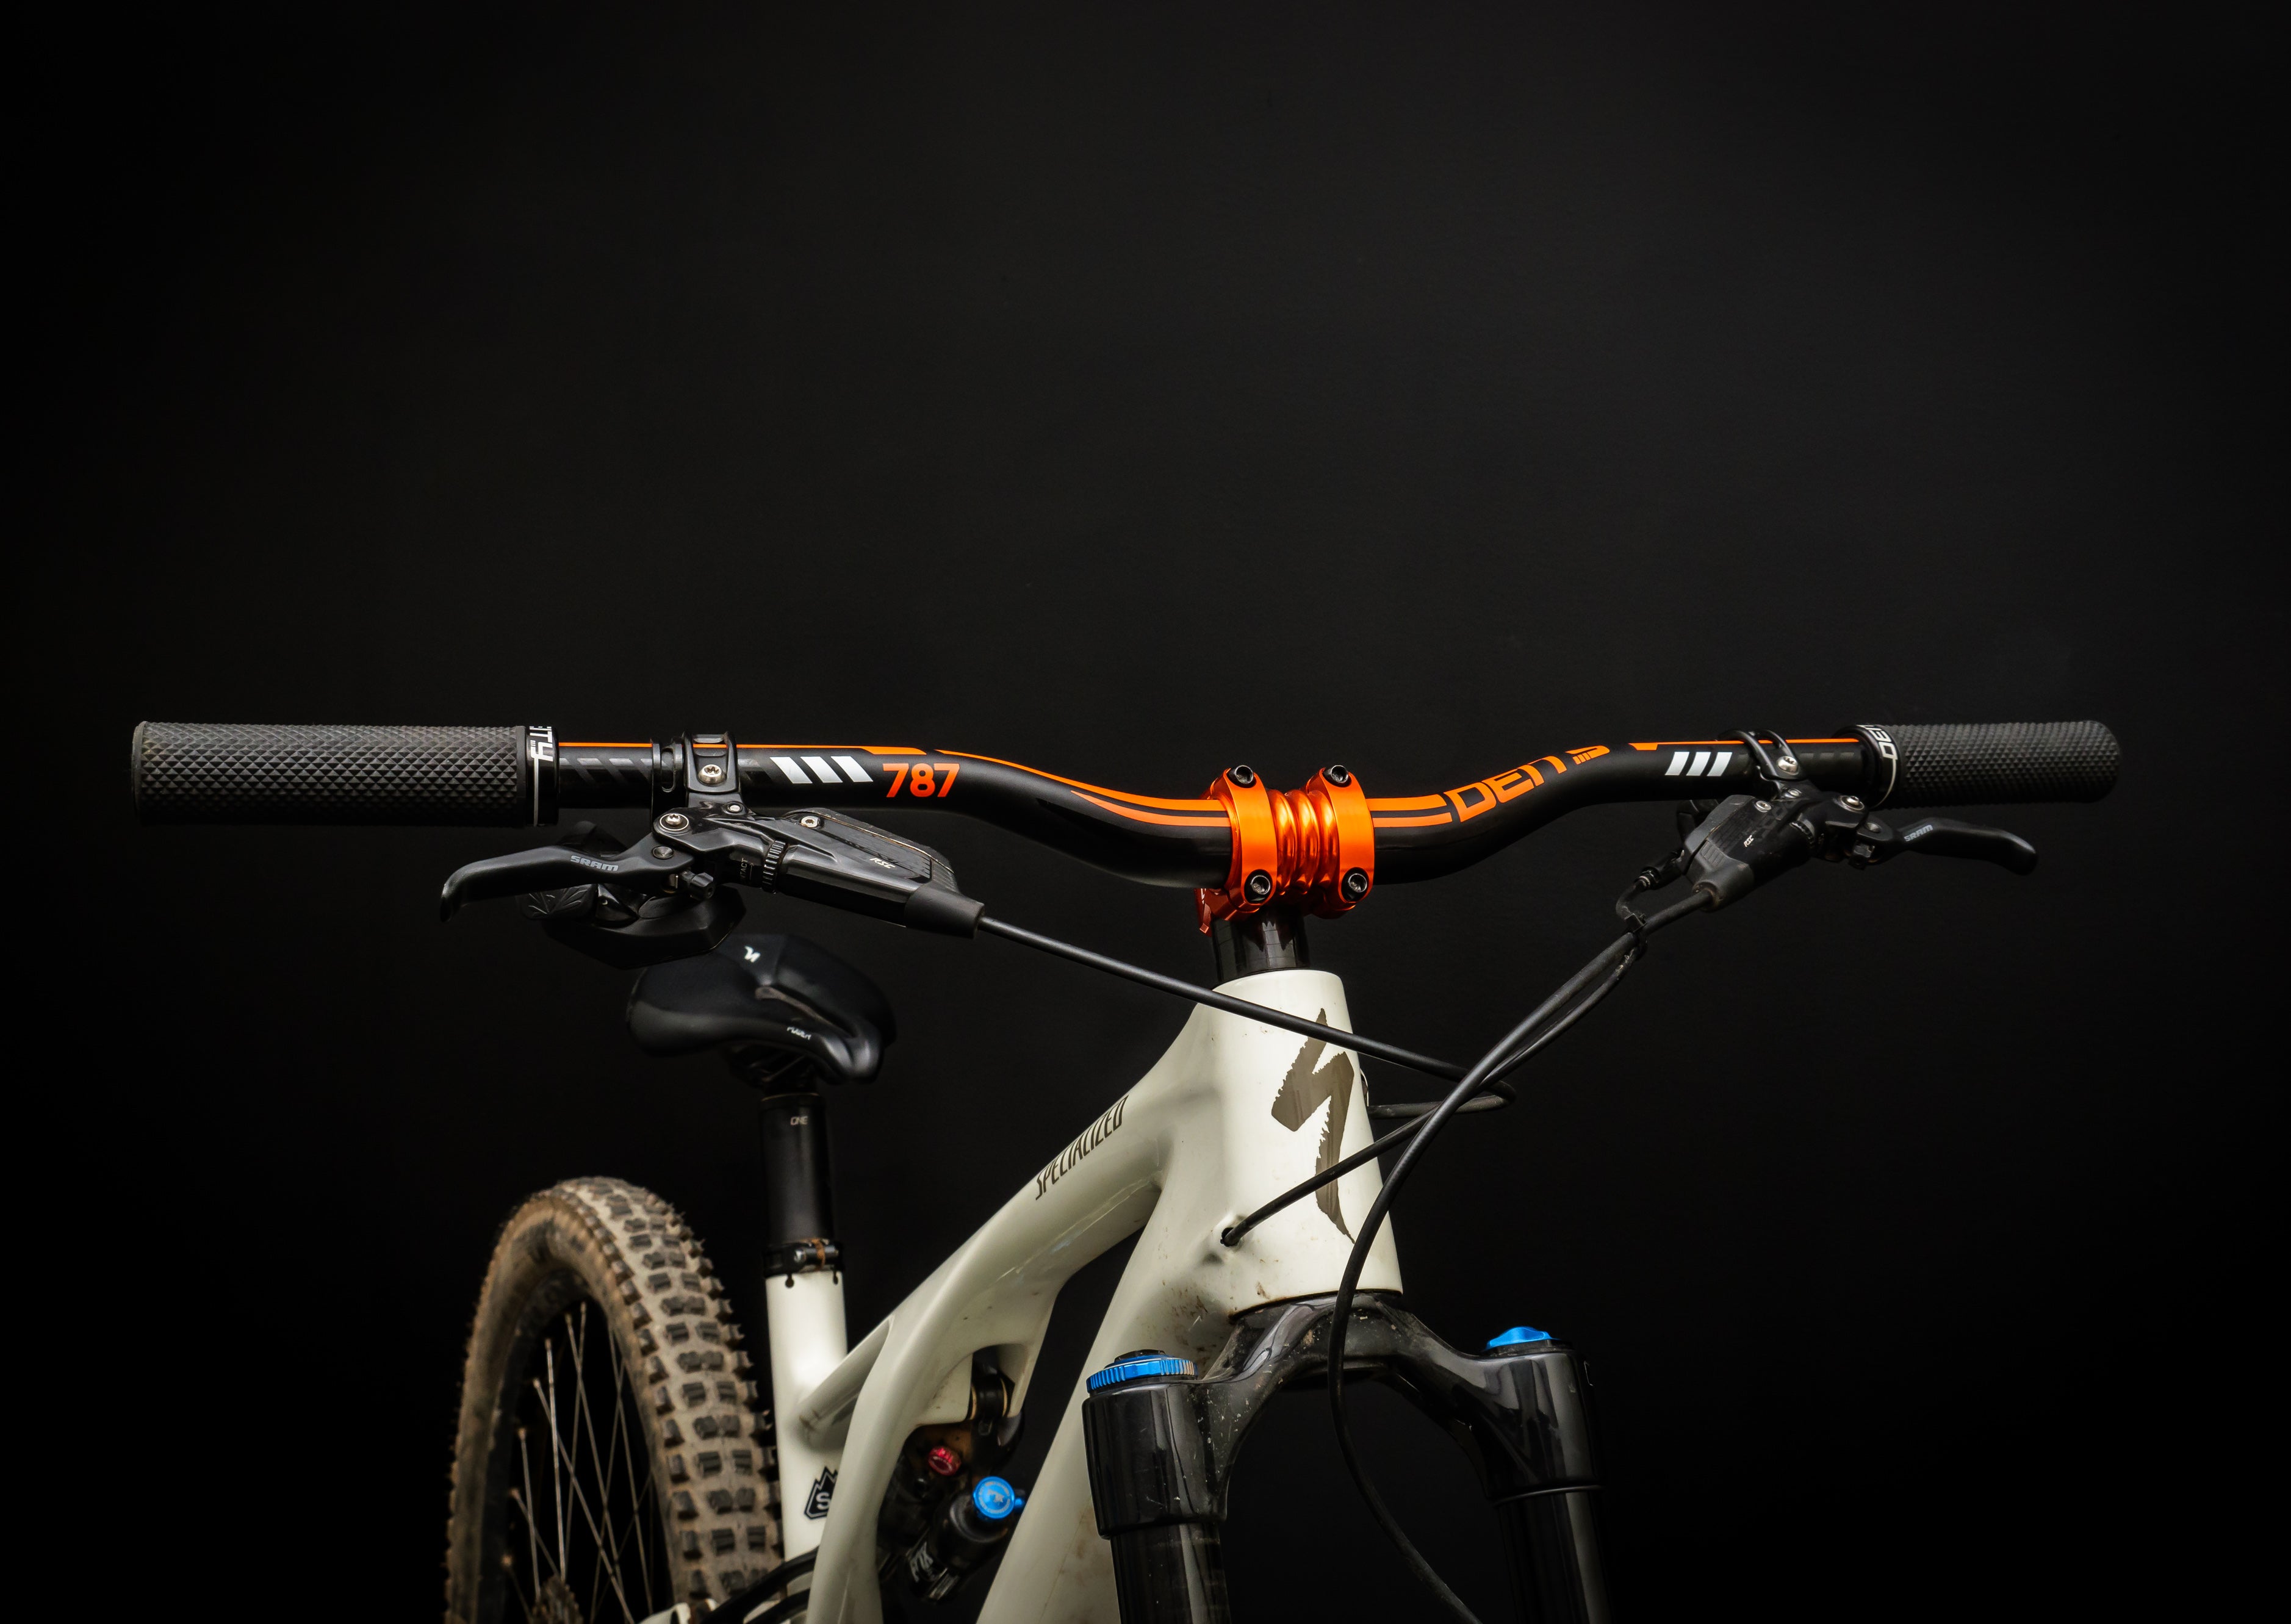 Deity Skywire 787 Alloy Handlebar Review